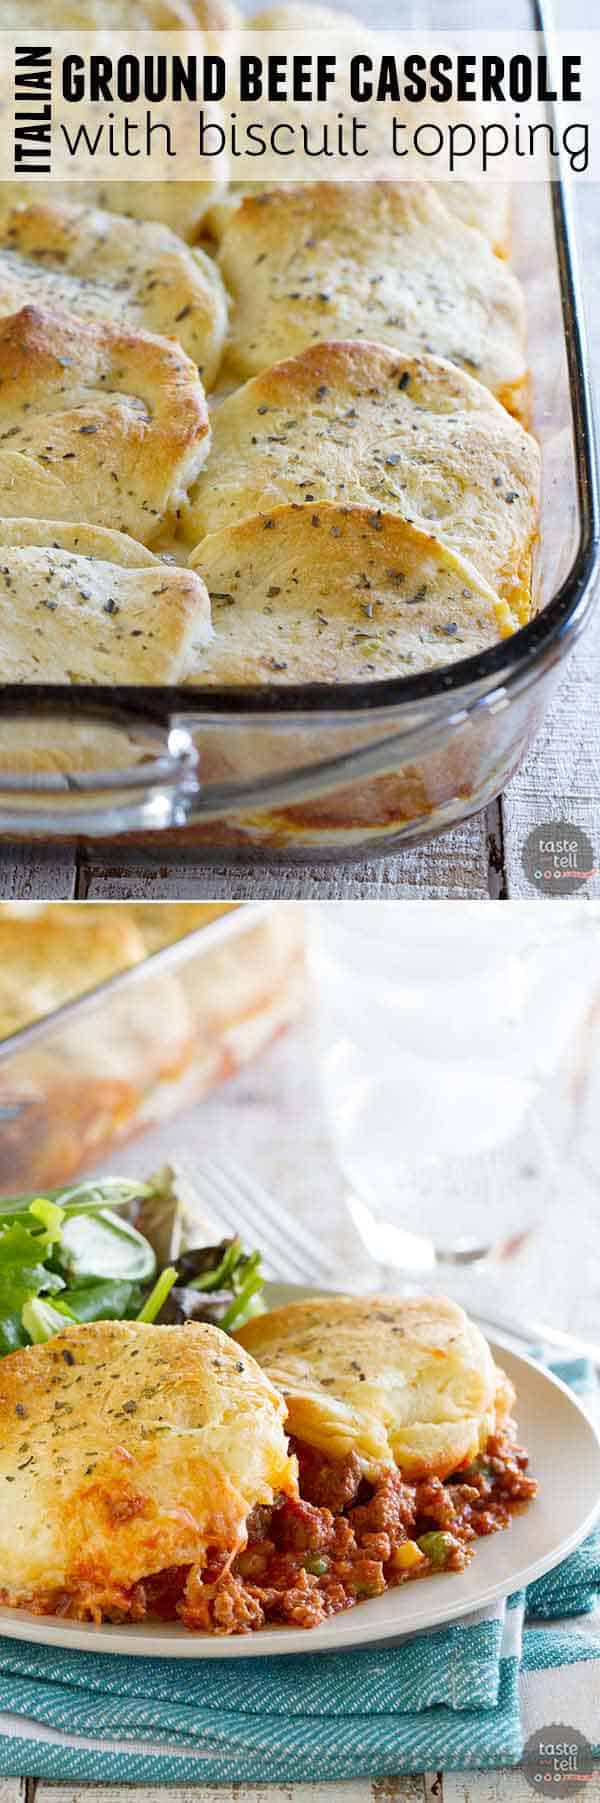 Italian Ground Beef Casserole with Biscuit Topping collage with text overlay